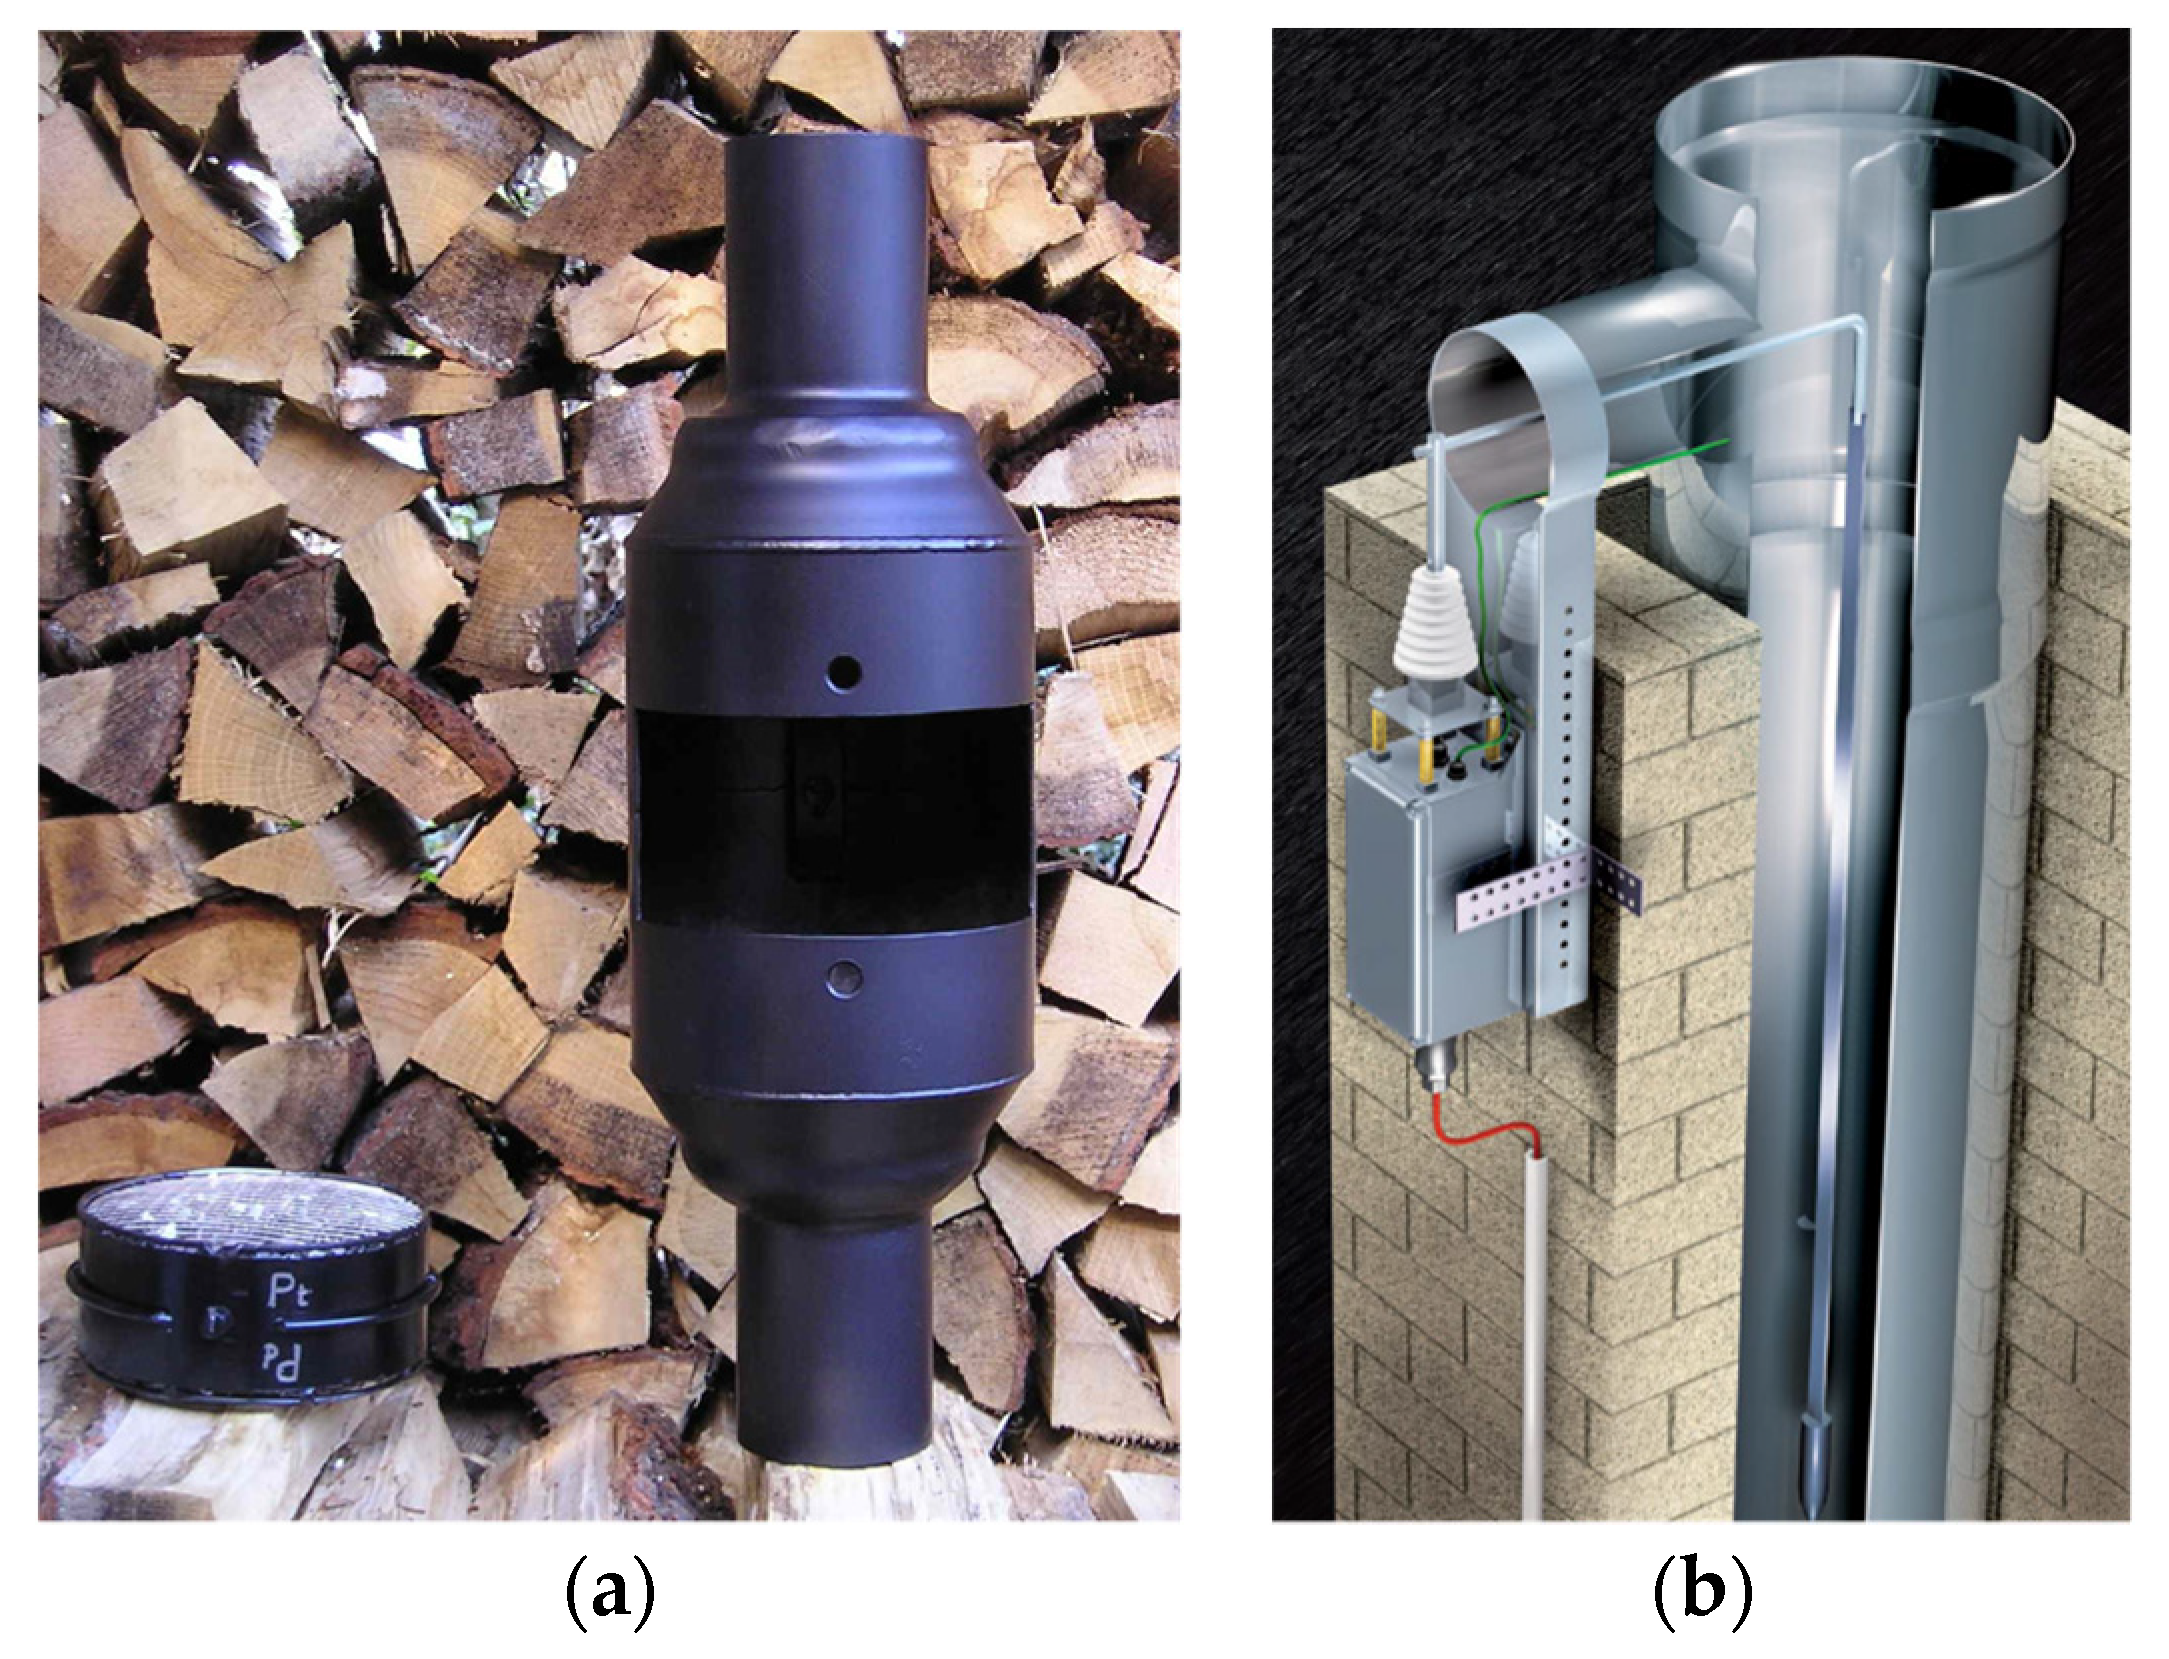 Energies | Free Full-Text | Efficiency of Emission Reduction Technologies  for Residential Biomass Combustion Appliances: Electrostatic Precipitator  and Catalyst